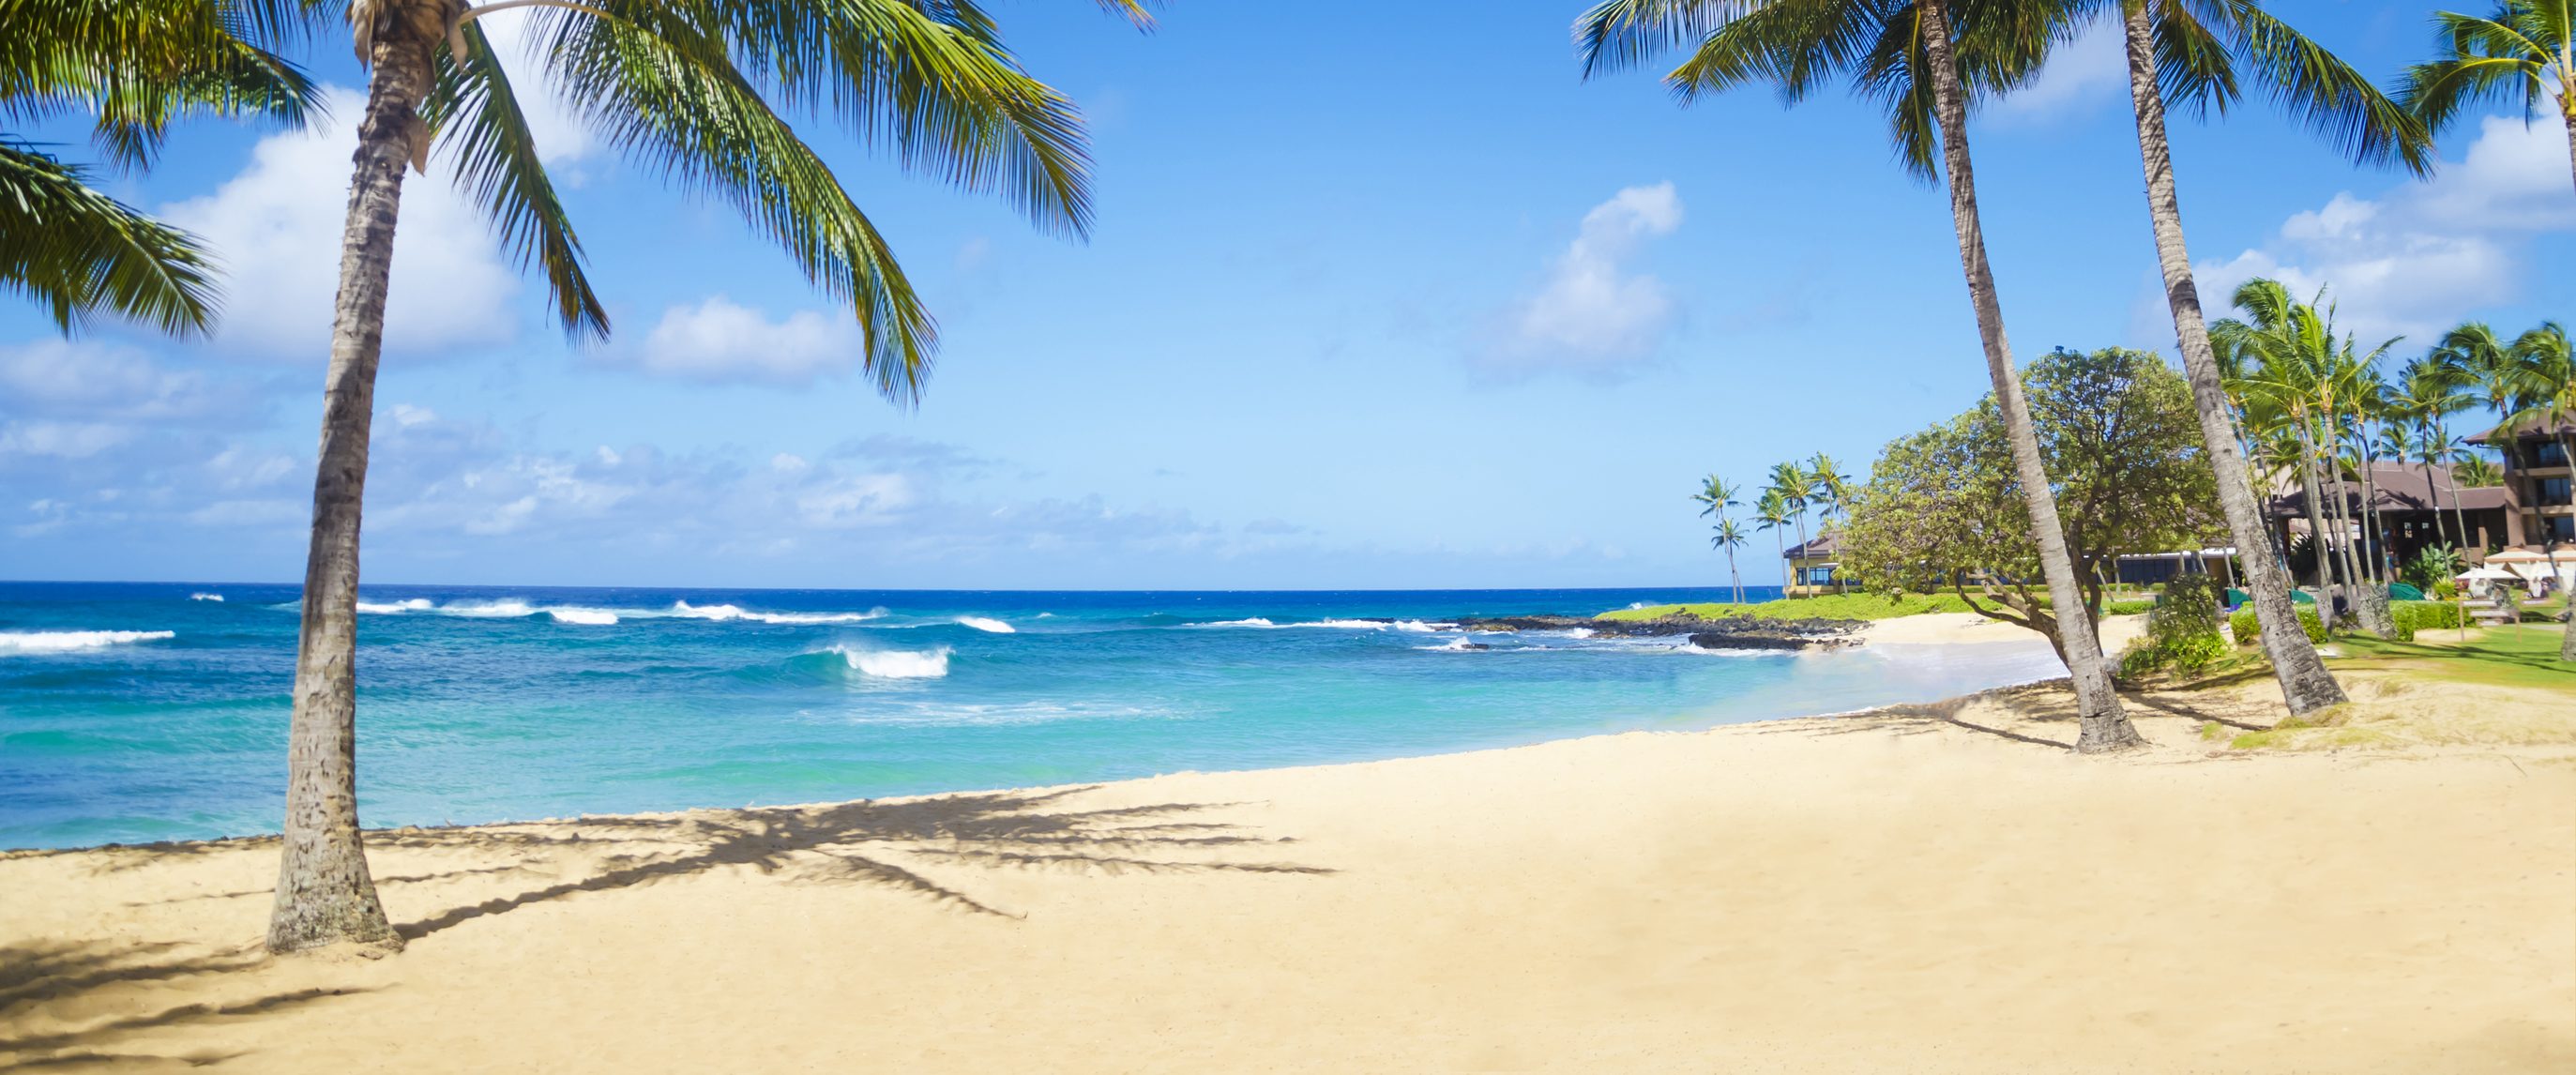 Round-trip flights to Hawaii from $333